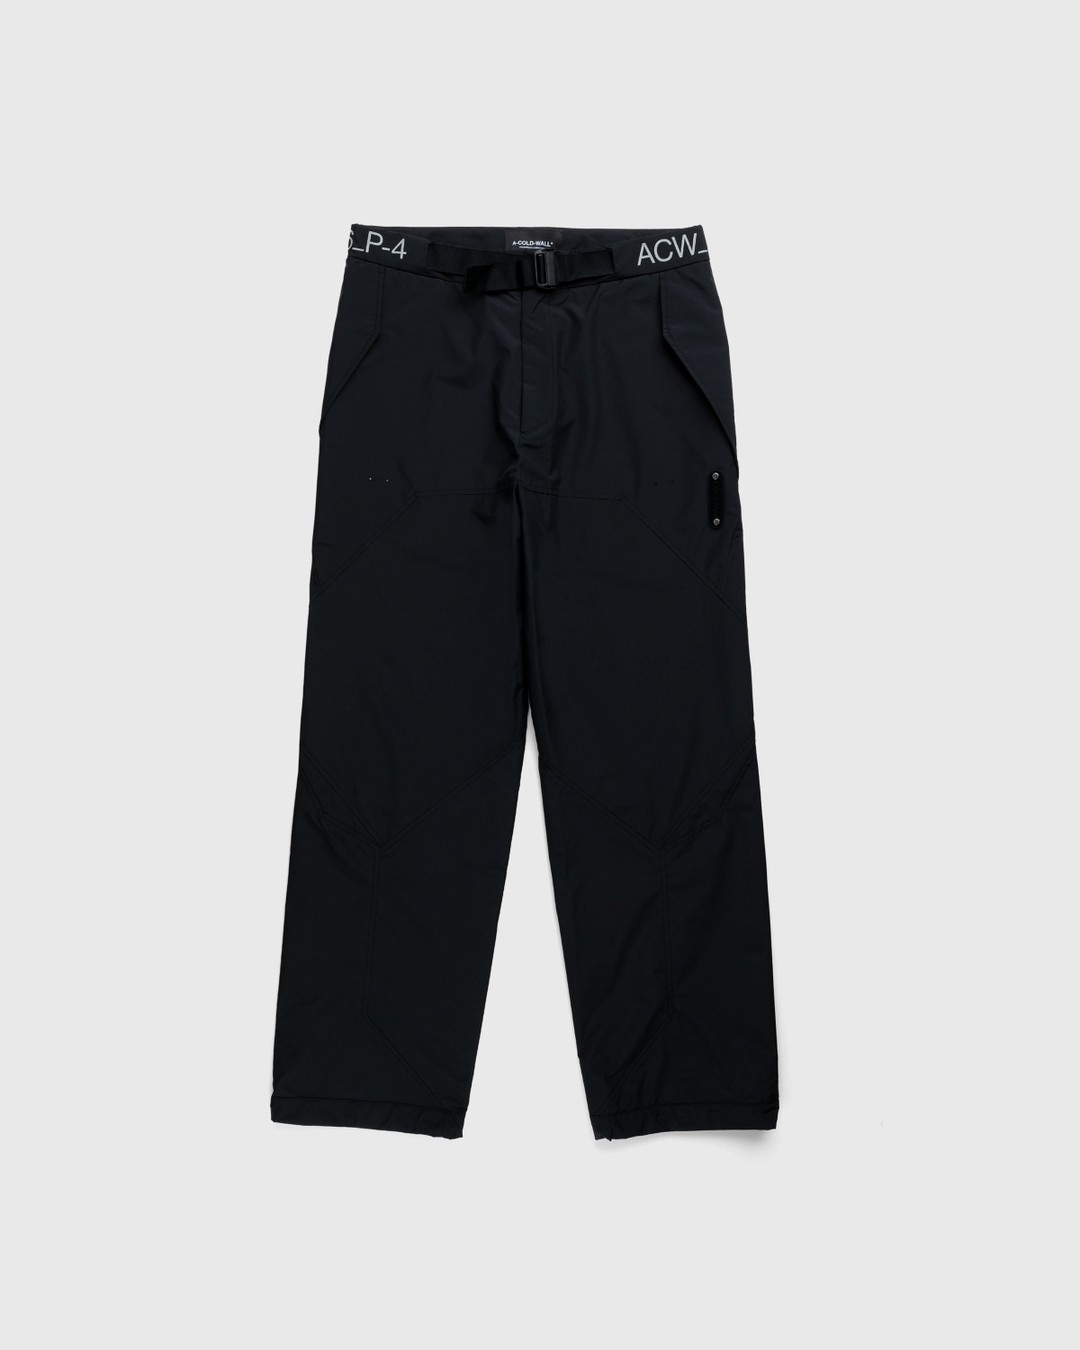 A-Cold-Wall* – Nephin Storm Pants Black - Active Pants - Black - Image 1